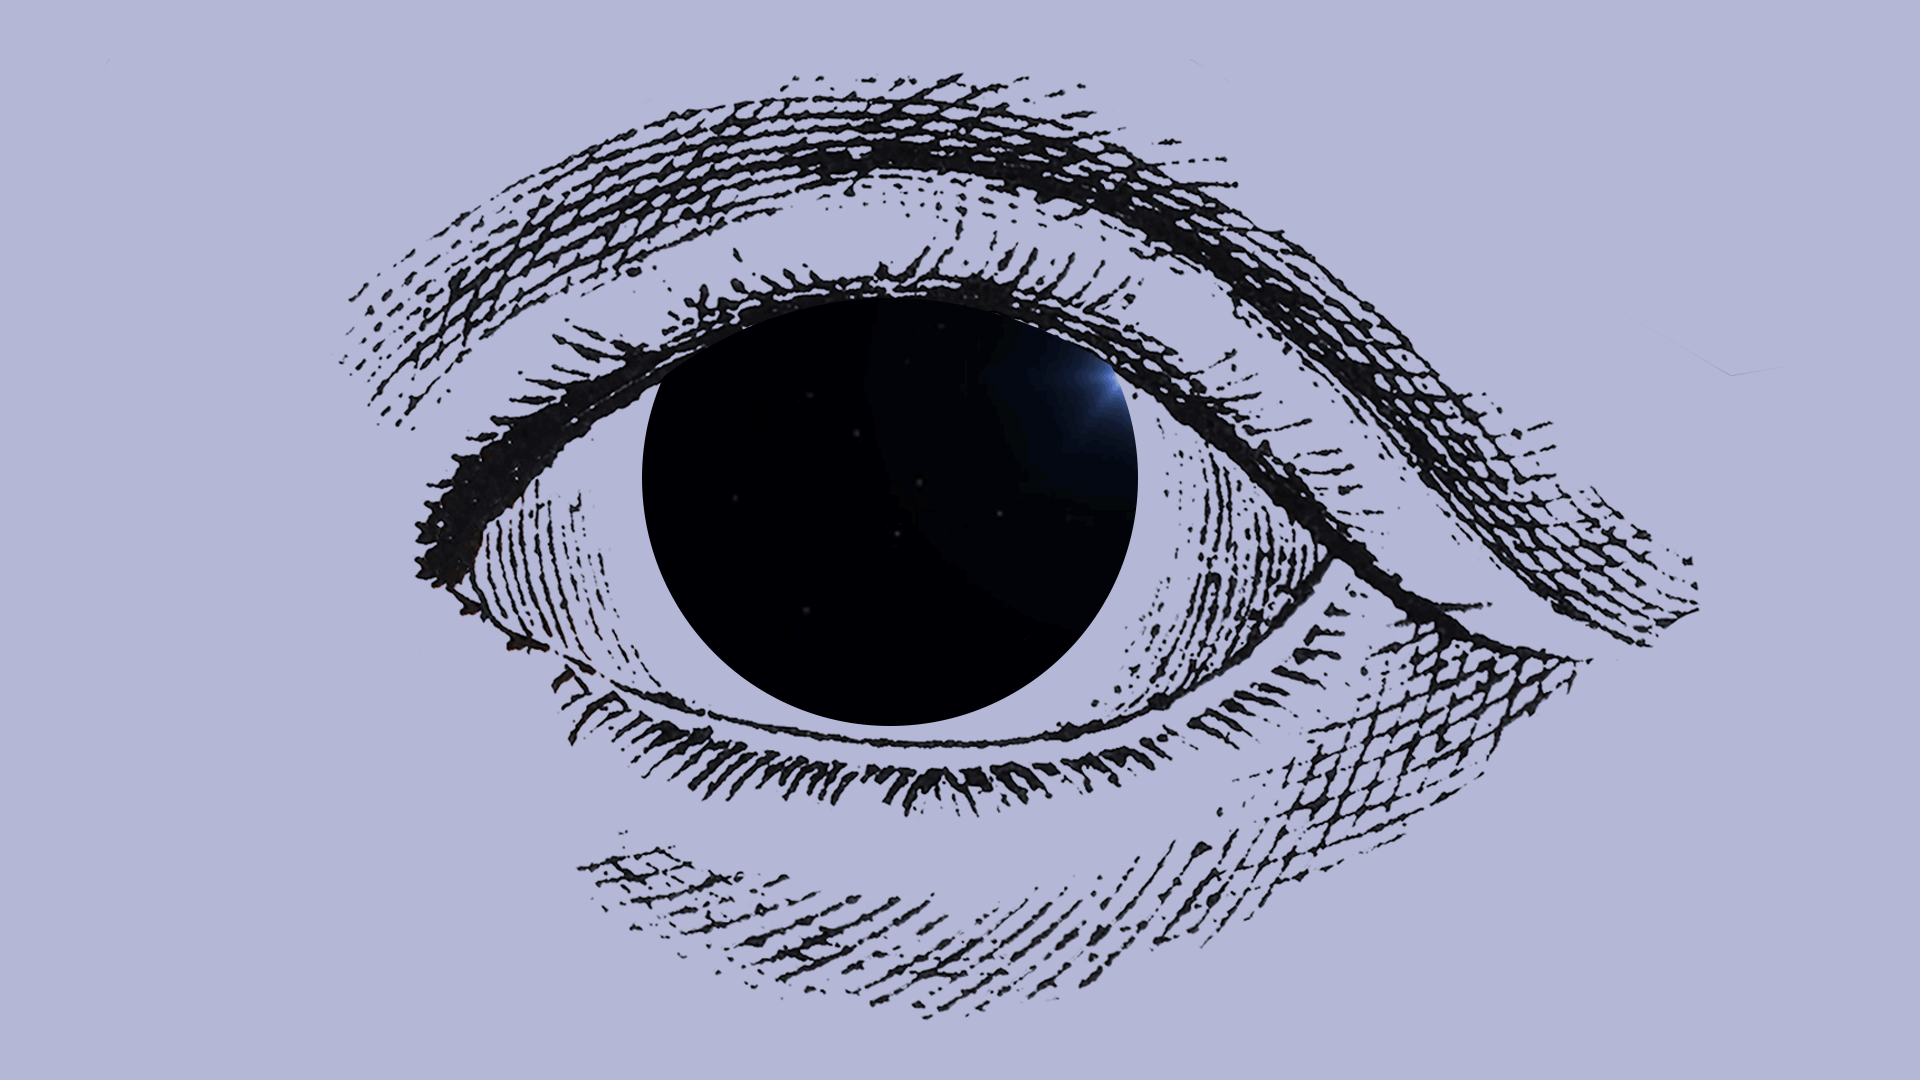 Illustration of an engraved eye with a comet shooting across the center